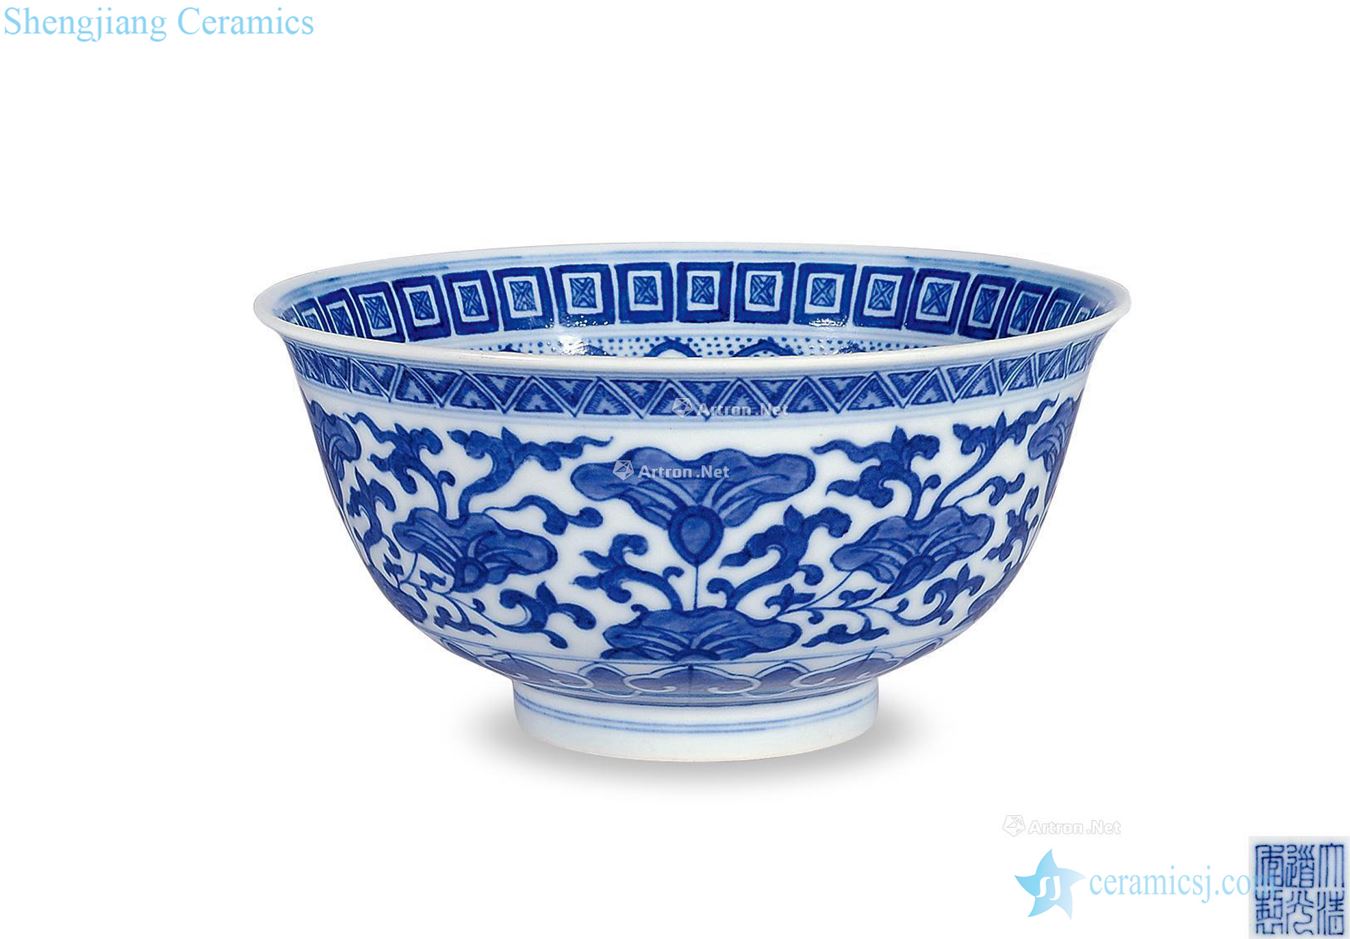 Qing daoguang Blue and white inside and outside the lotus flower green-splashed bowls